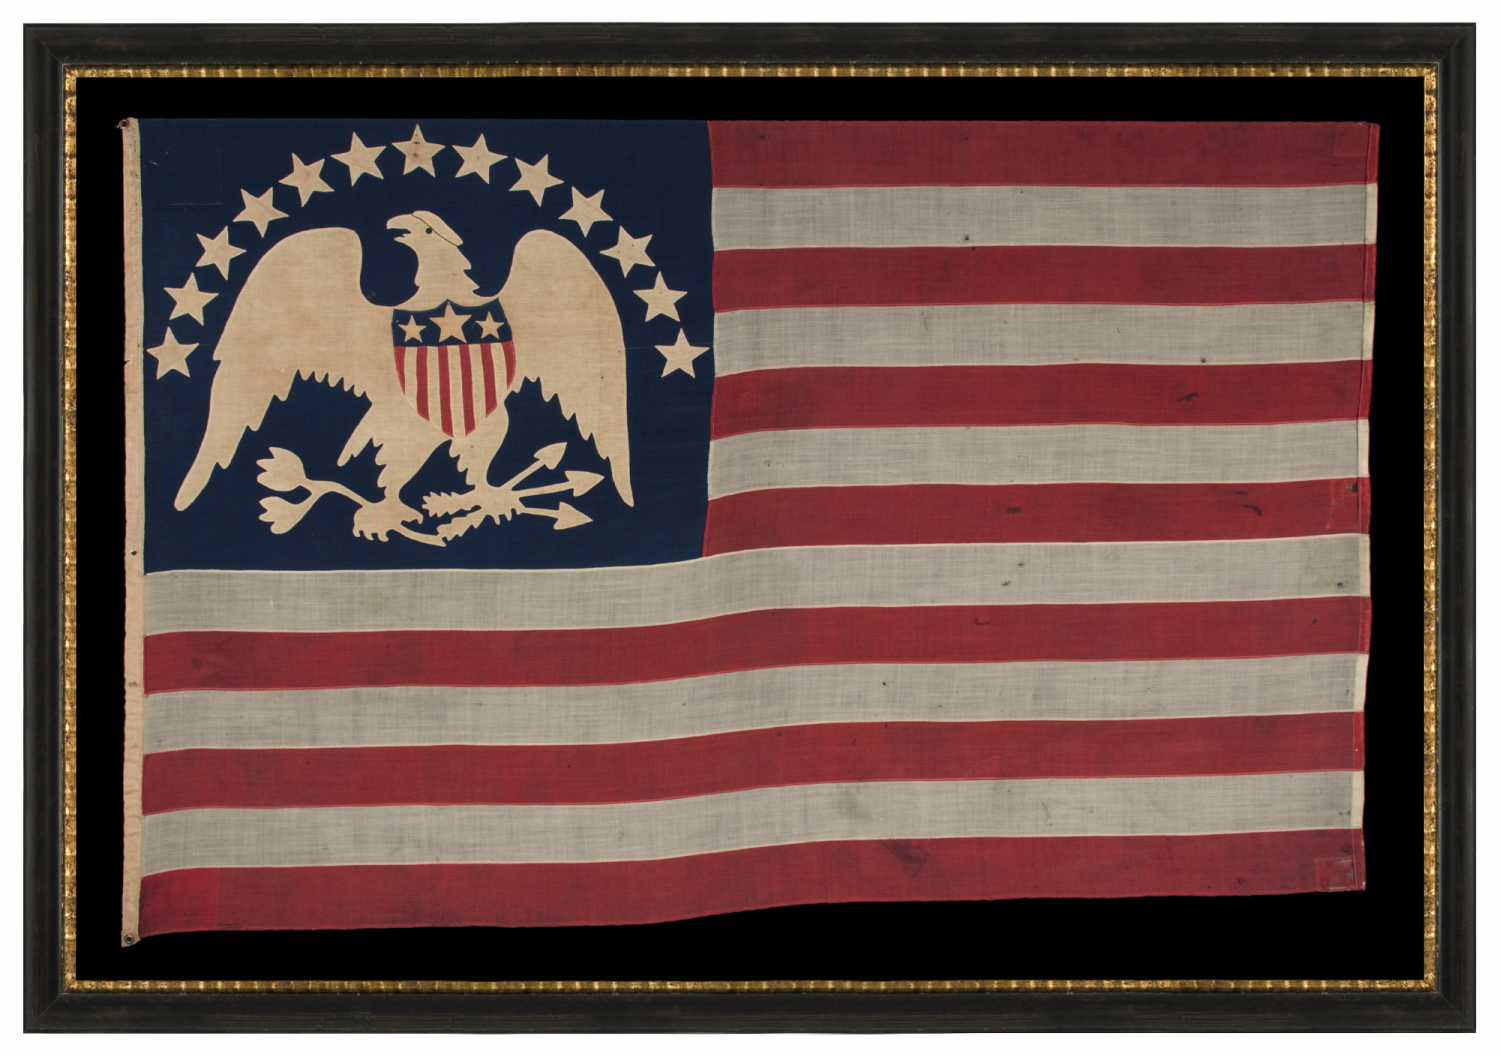 13 STAR ANTIQUE AMERICAN FLAG WITH A BROAD, ARCHED FORMATION OF HAND-SEWN, SINGLE-APPLIQUÉD STARS, ARCH ABOVE A BEAUTIFULLY HAND-SEWN FEDERAL EAGLE, ATTRIBUTED TO FLAG-MAKER SARAH McFADDEN – “NEW YORK’S BETSY ROSS” – AT 198 HUDSON STREET IN MANHATTAN, circa 1870-1880; EXHIBITED AT THE MUSEUM OF THE AMERICAN REVOLUTION FROM JUNE – JULY, 2019